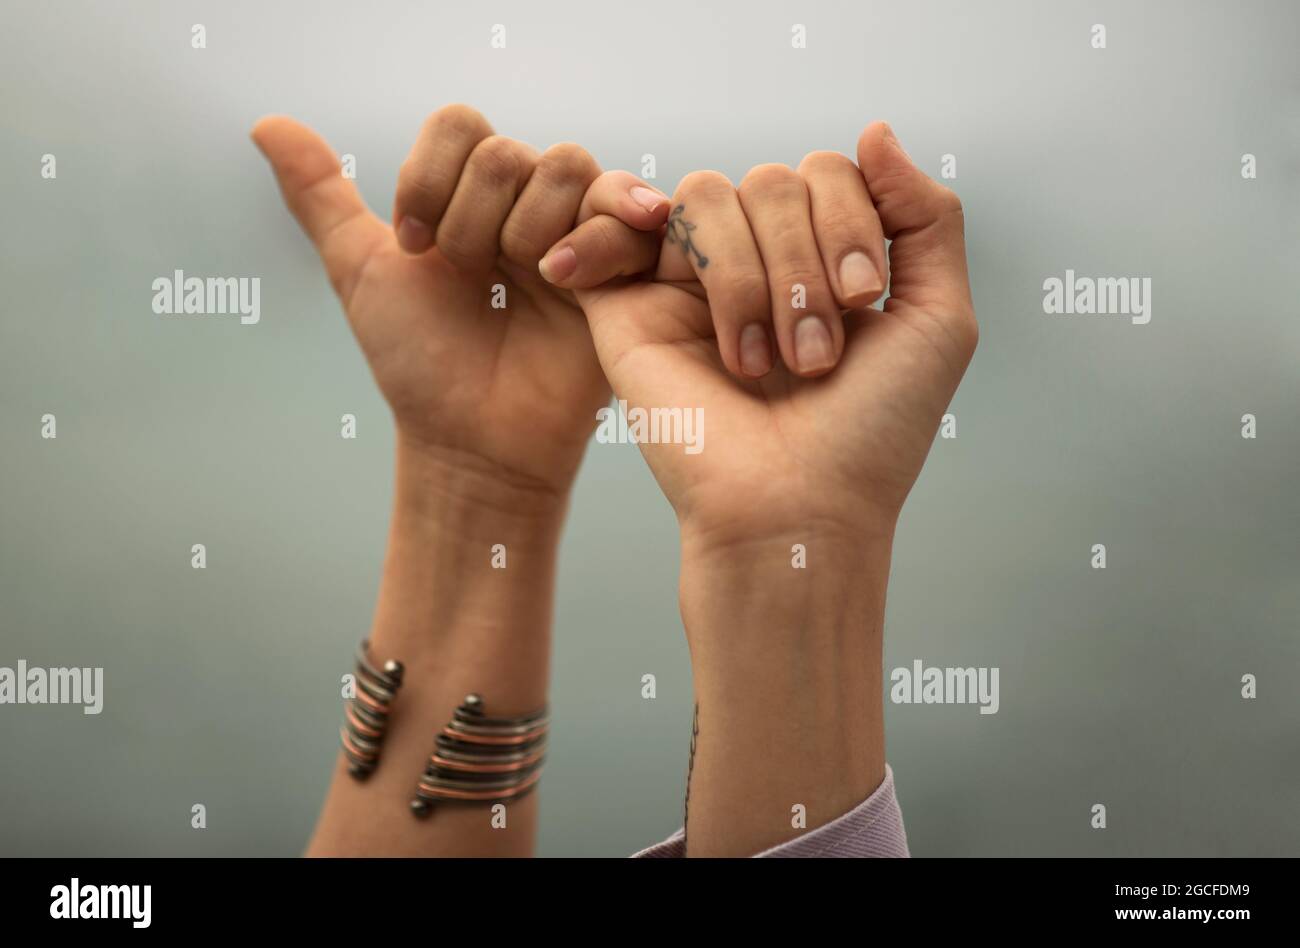 gesture of friendship with hands Stock Photo